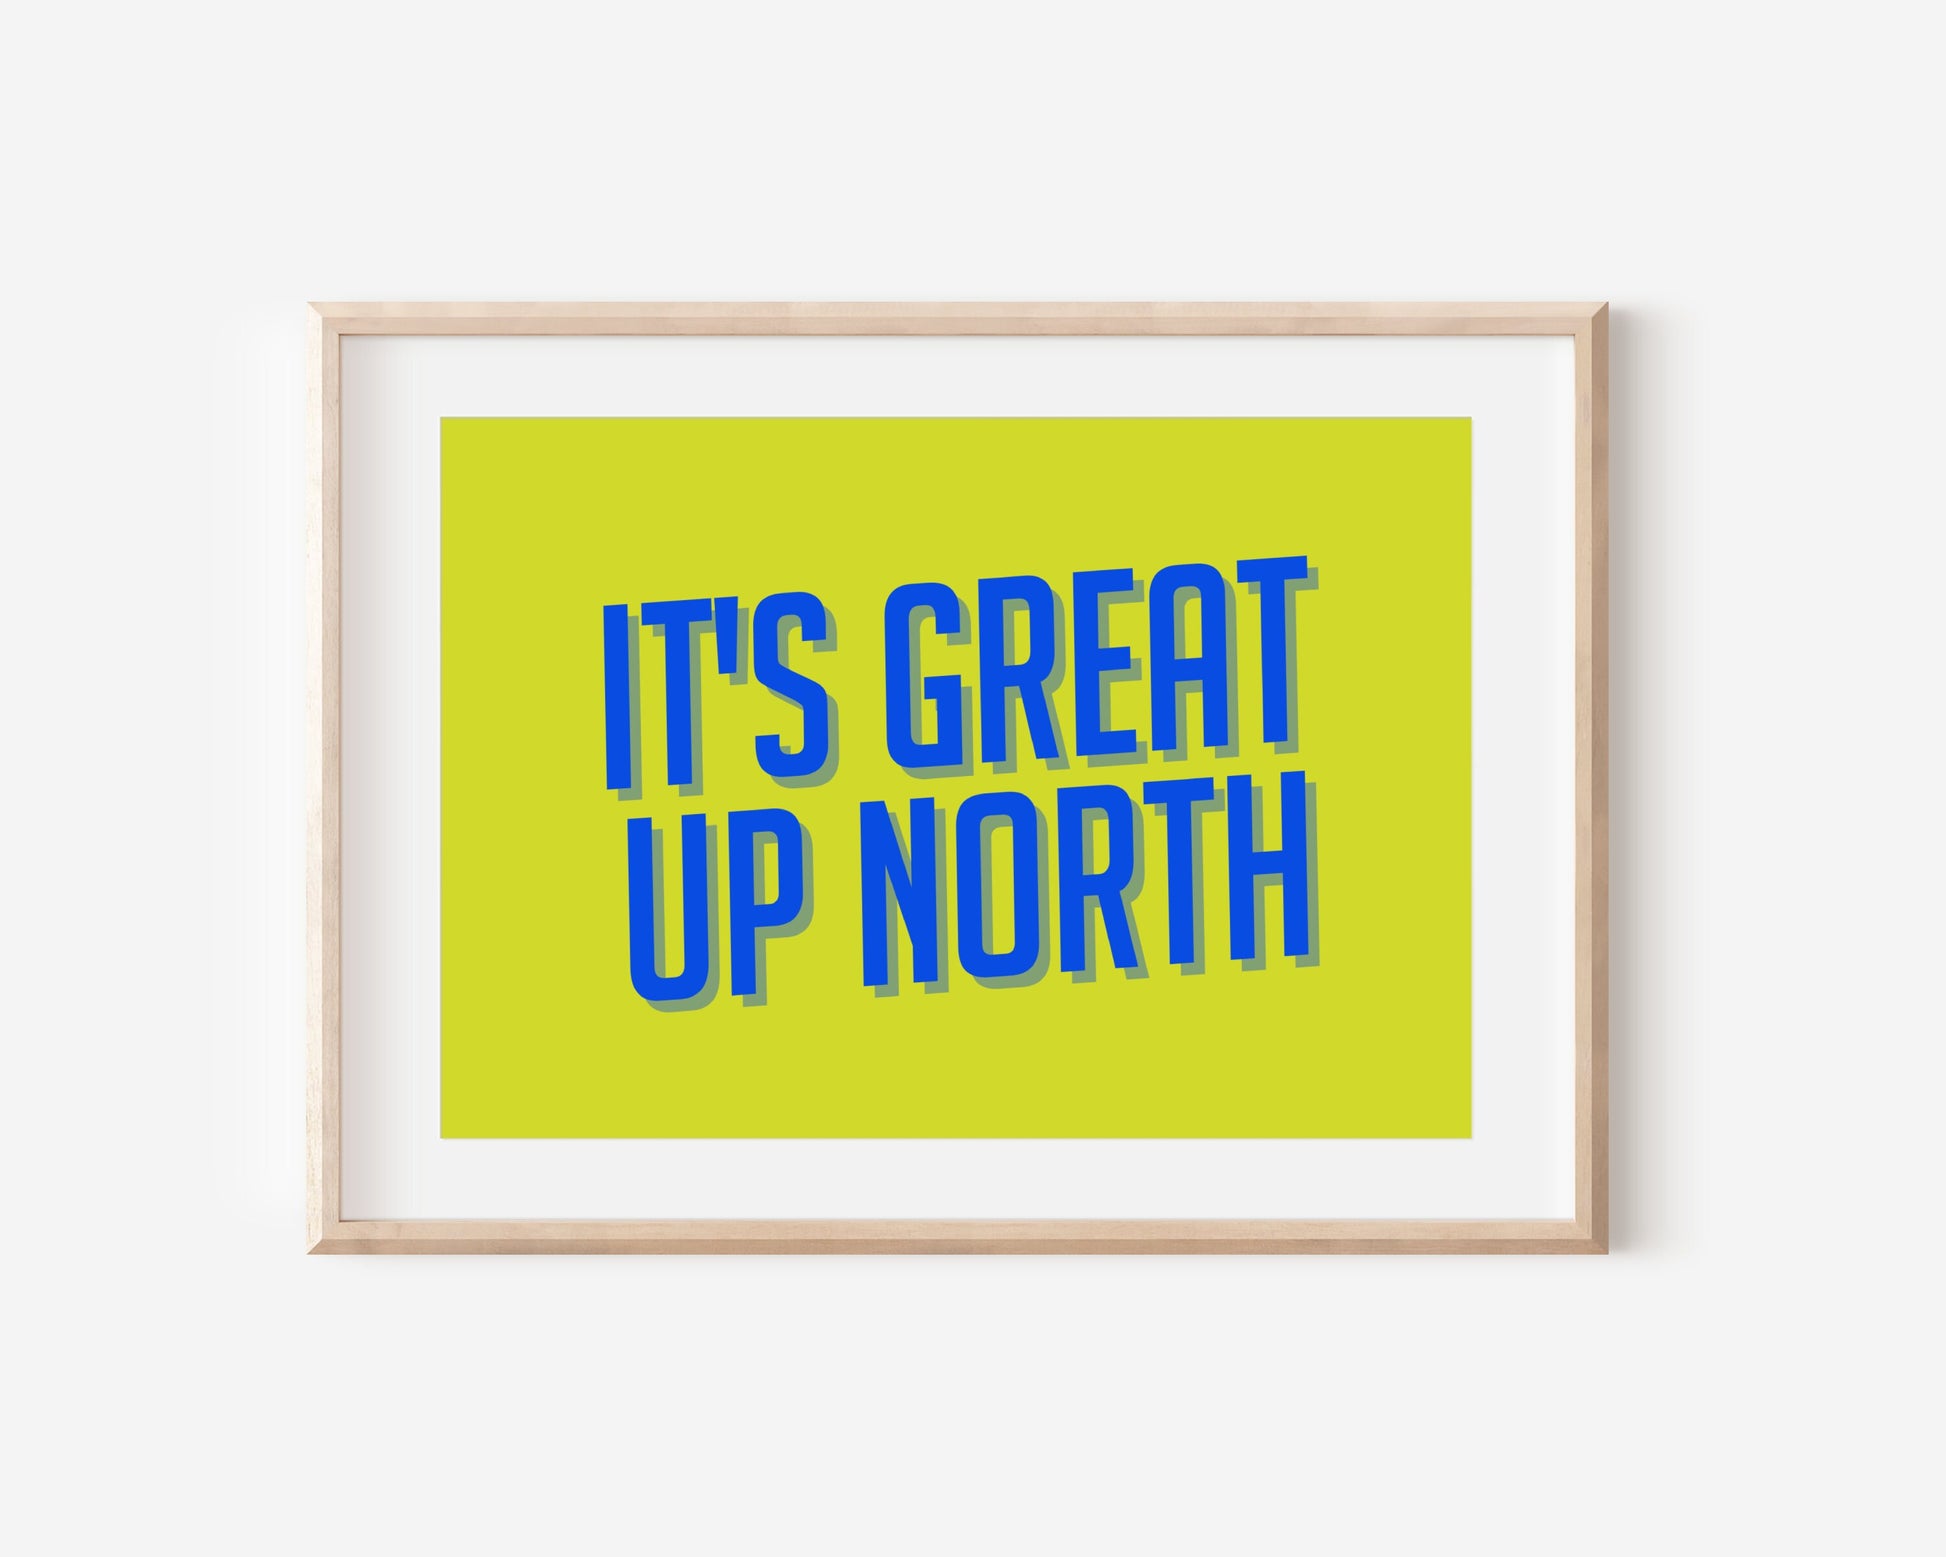 It's Great Up North print, Up North, Northern Print, Northern City, Manchester, Leeds, Yorkshire, Lancashire, Indie Poster, A5 A4 A3, North